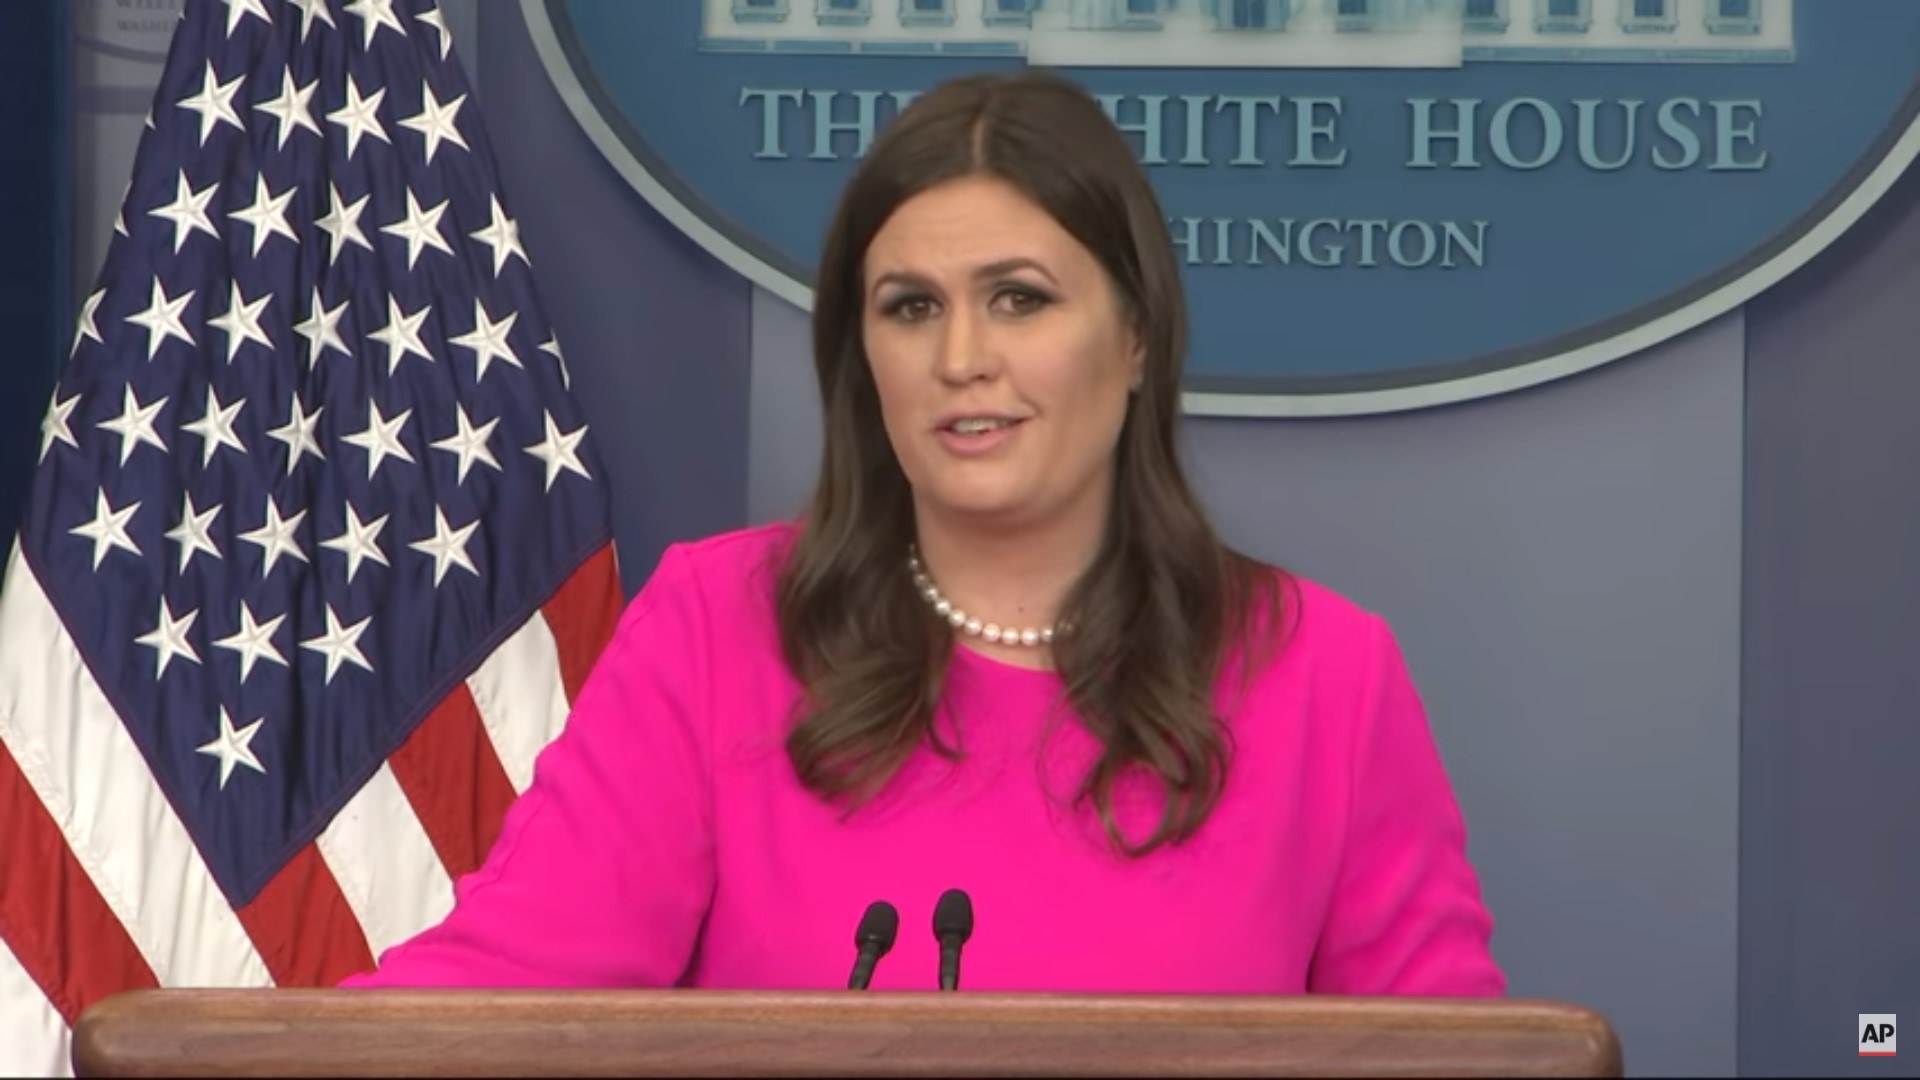 Remember When Sarah Huckabee Sanders Told Reporters They ‘Should Get A Sense Of Humor’?